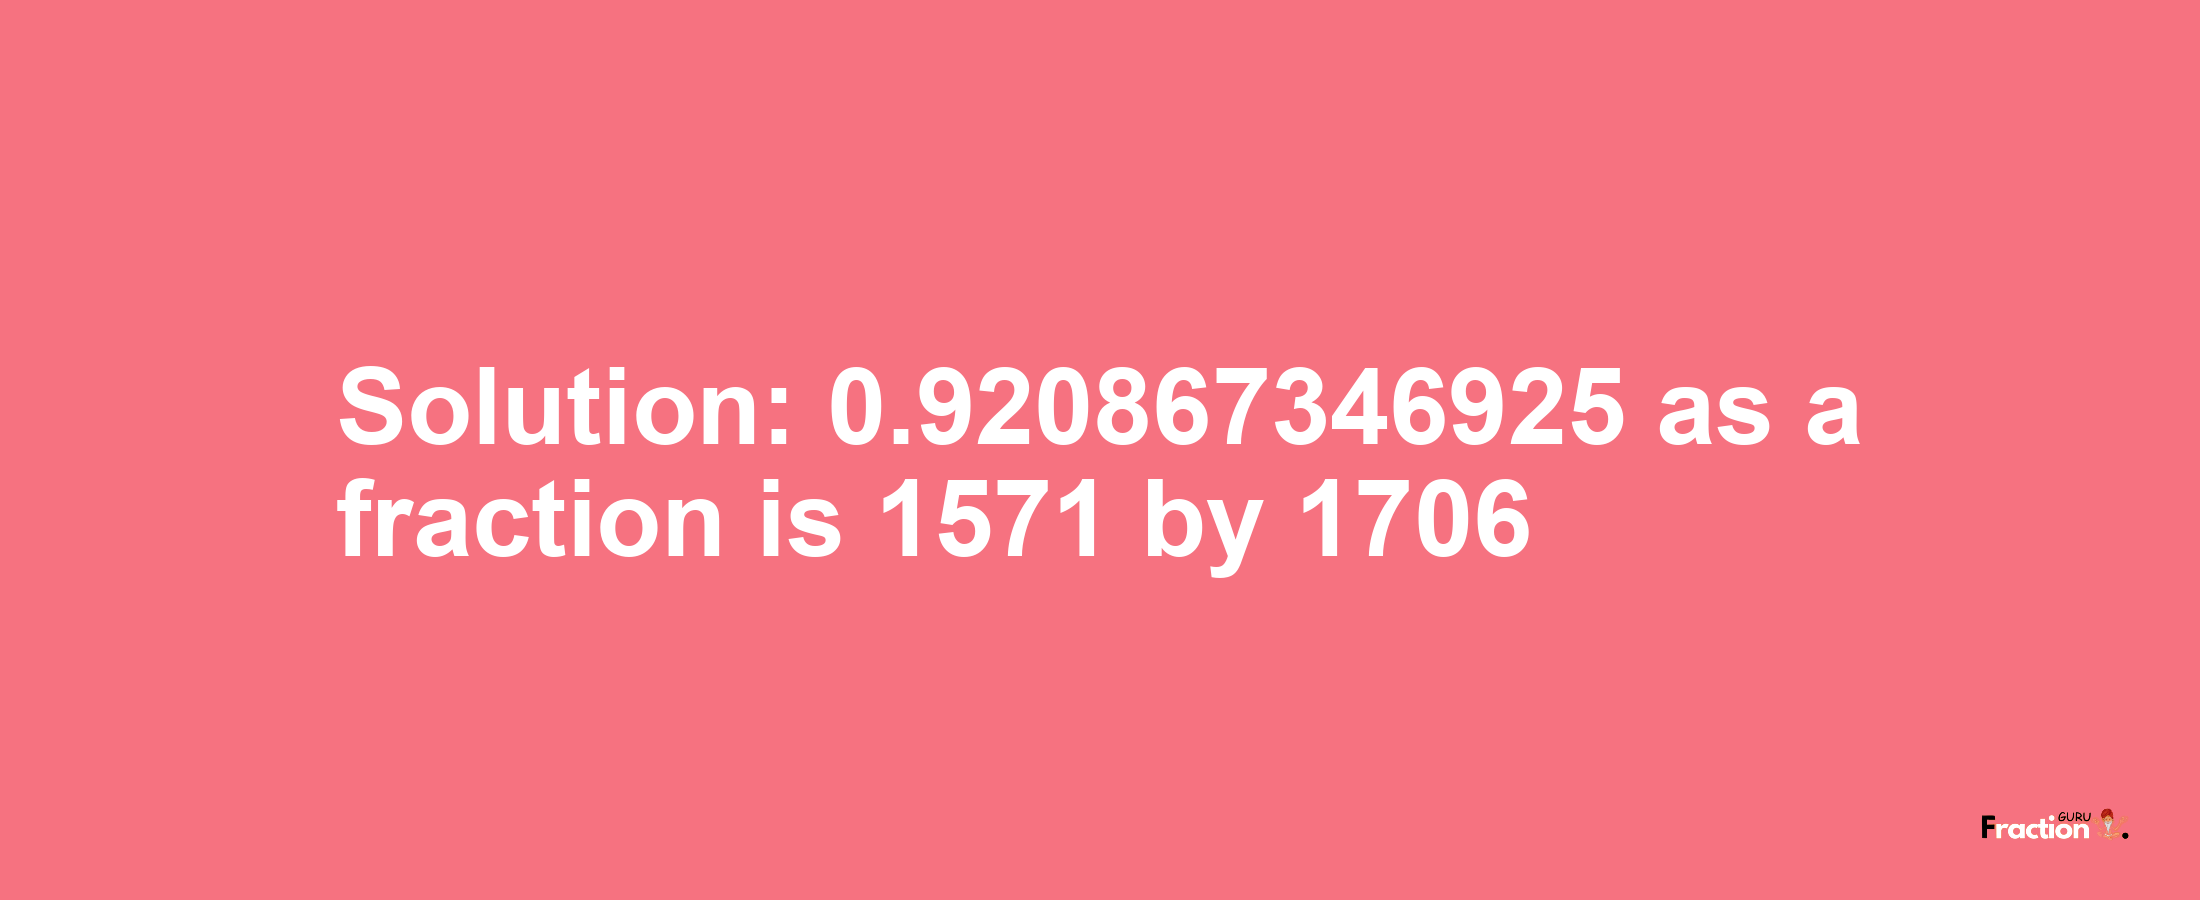 Solution:0.920867346925 as a fraction is 1571/1706